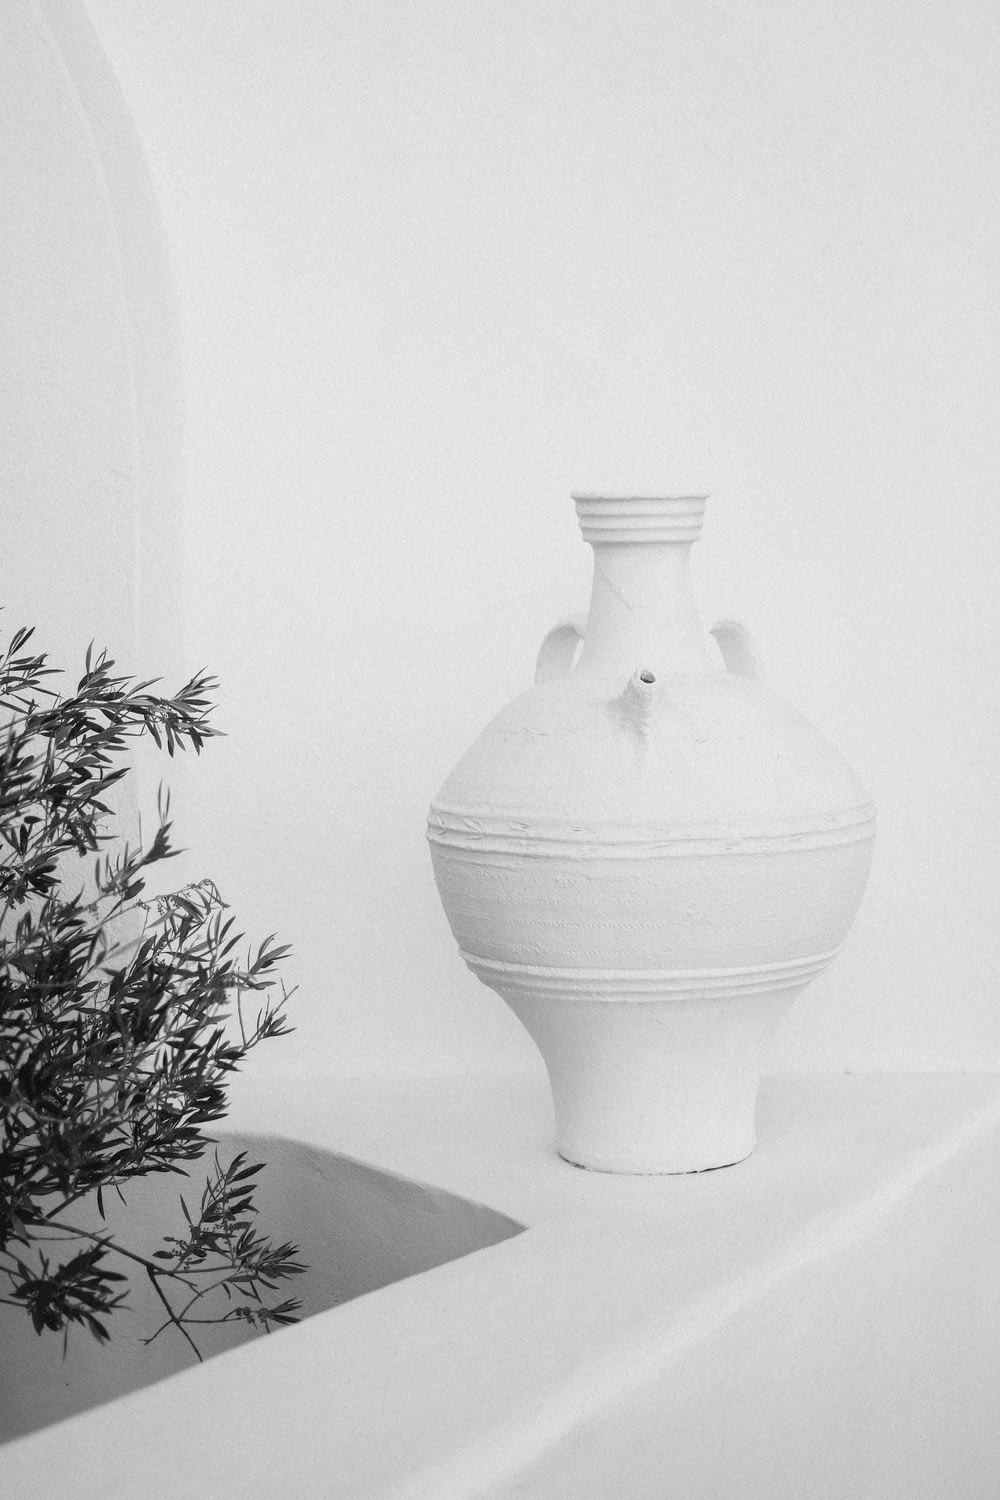 a black and white photo of a vase and a plant